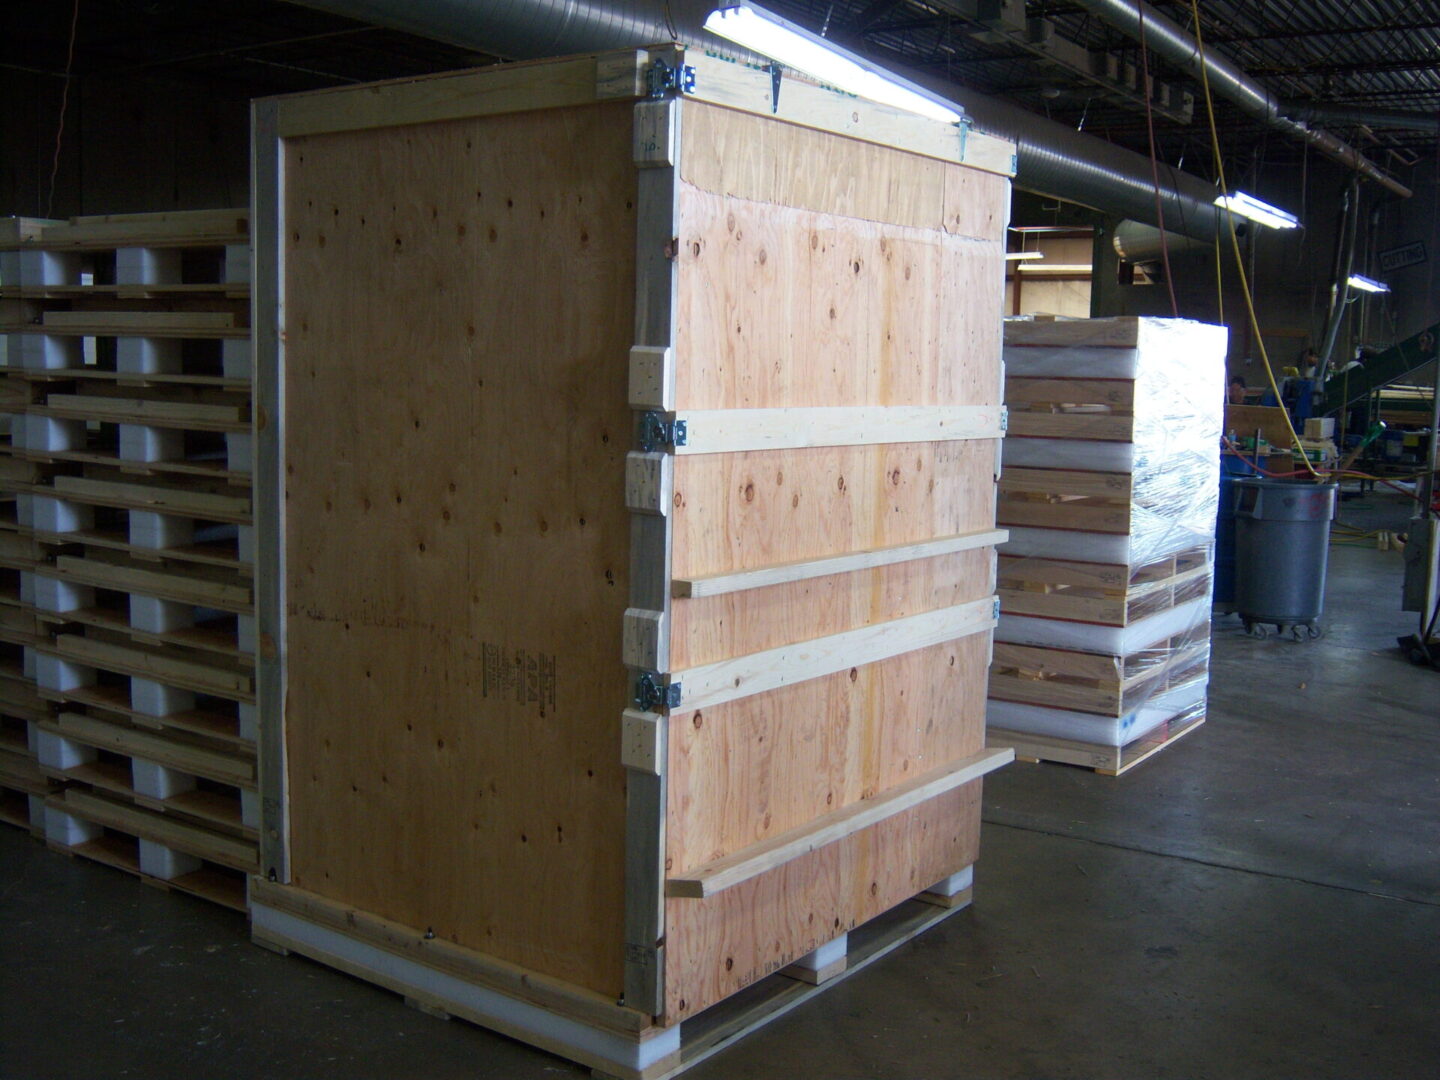 A large wooden crate in the middle of a warehouse.